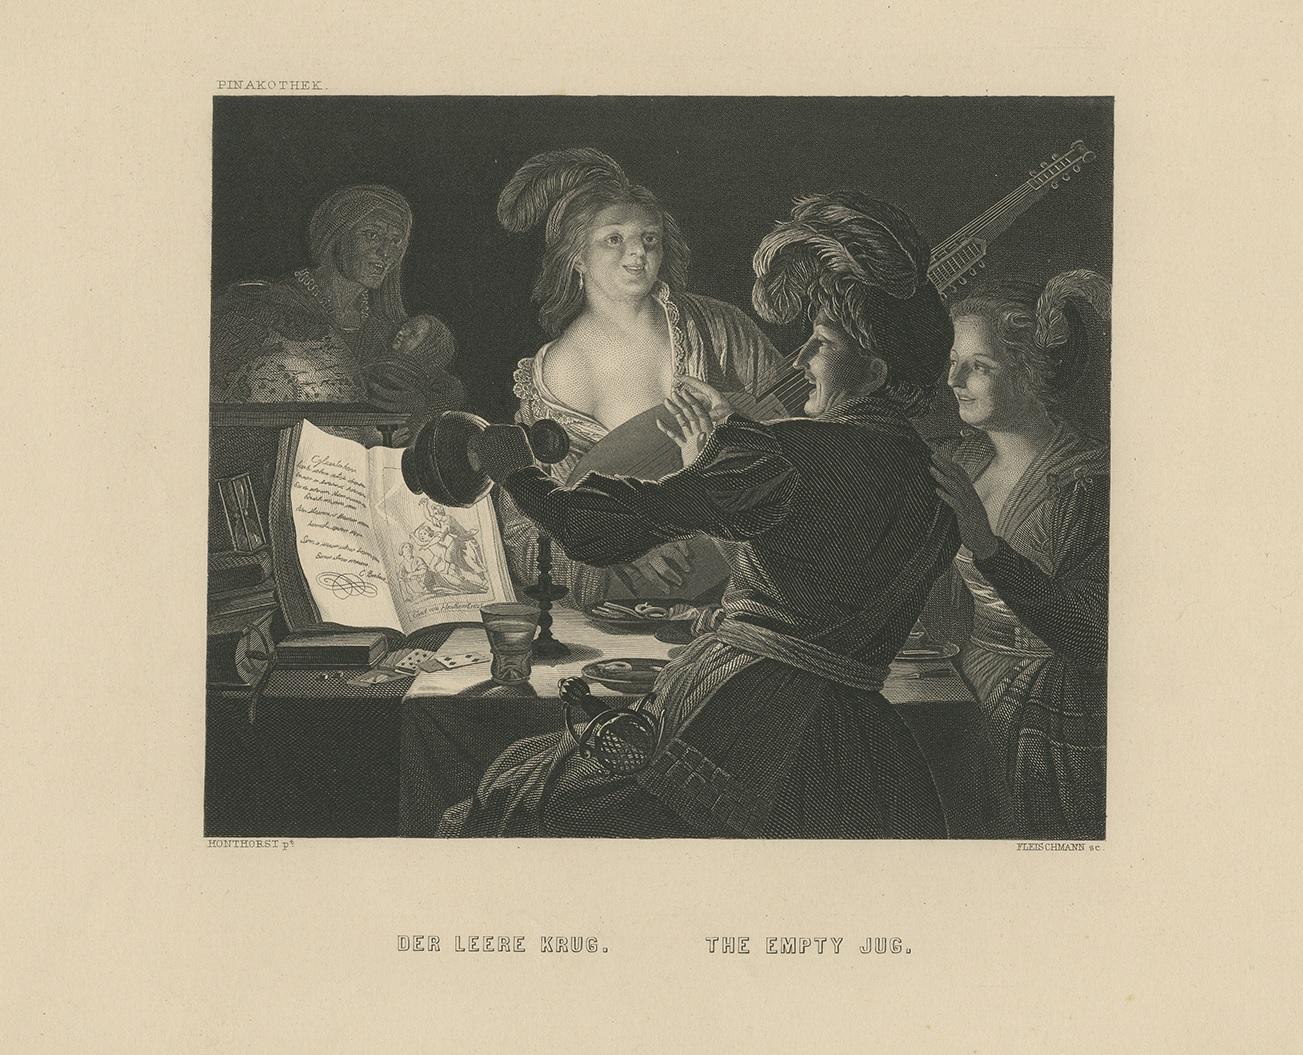 Antique print tiled 'Der Leere Krug - The Empty Jug'. Steel engraving showing a man holding an empty jug, a woman resting her hand on his shoulder, a woman playing the guitar and a biblical scene. Made after the painting by Gerrit van Honthorst.